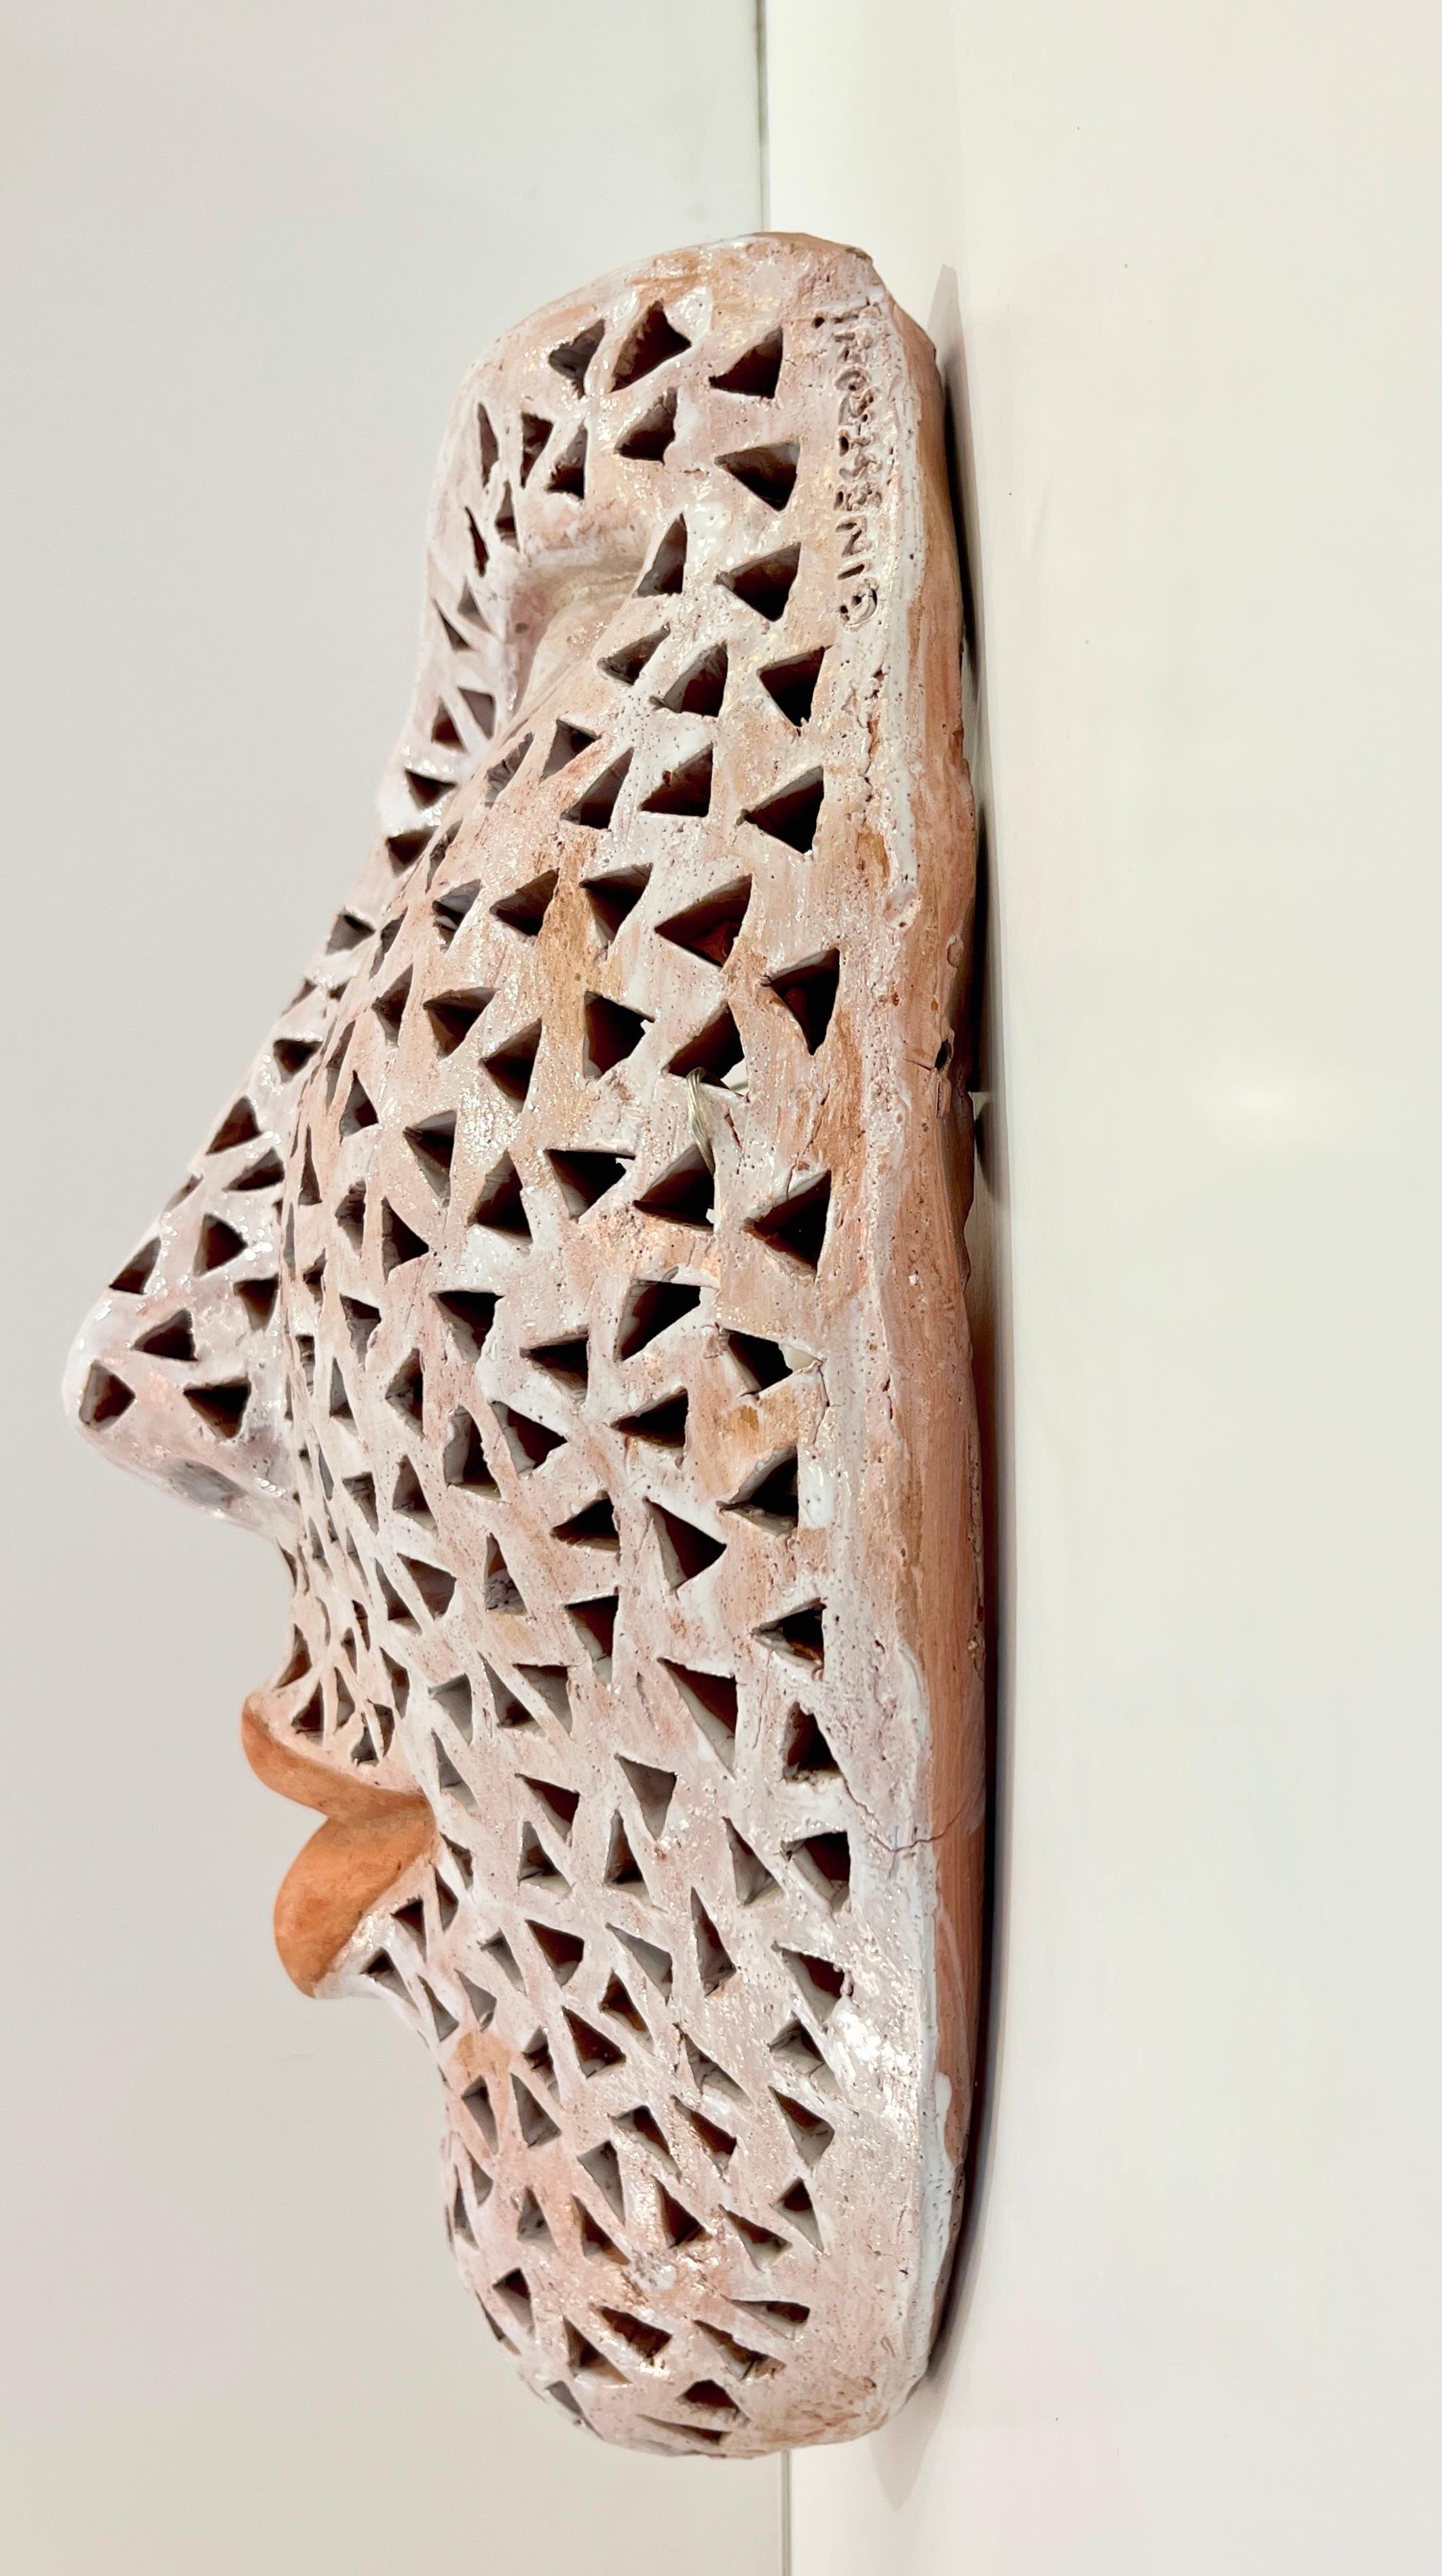 Italian Modern Perforated White Enameled Terracotta Wall Sculpture by Ginestroni In Excellent Condition For Sale In New York, NY